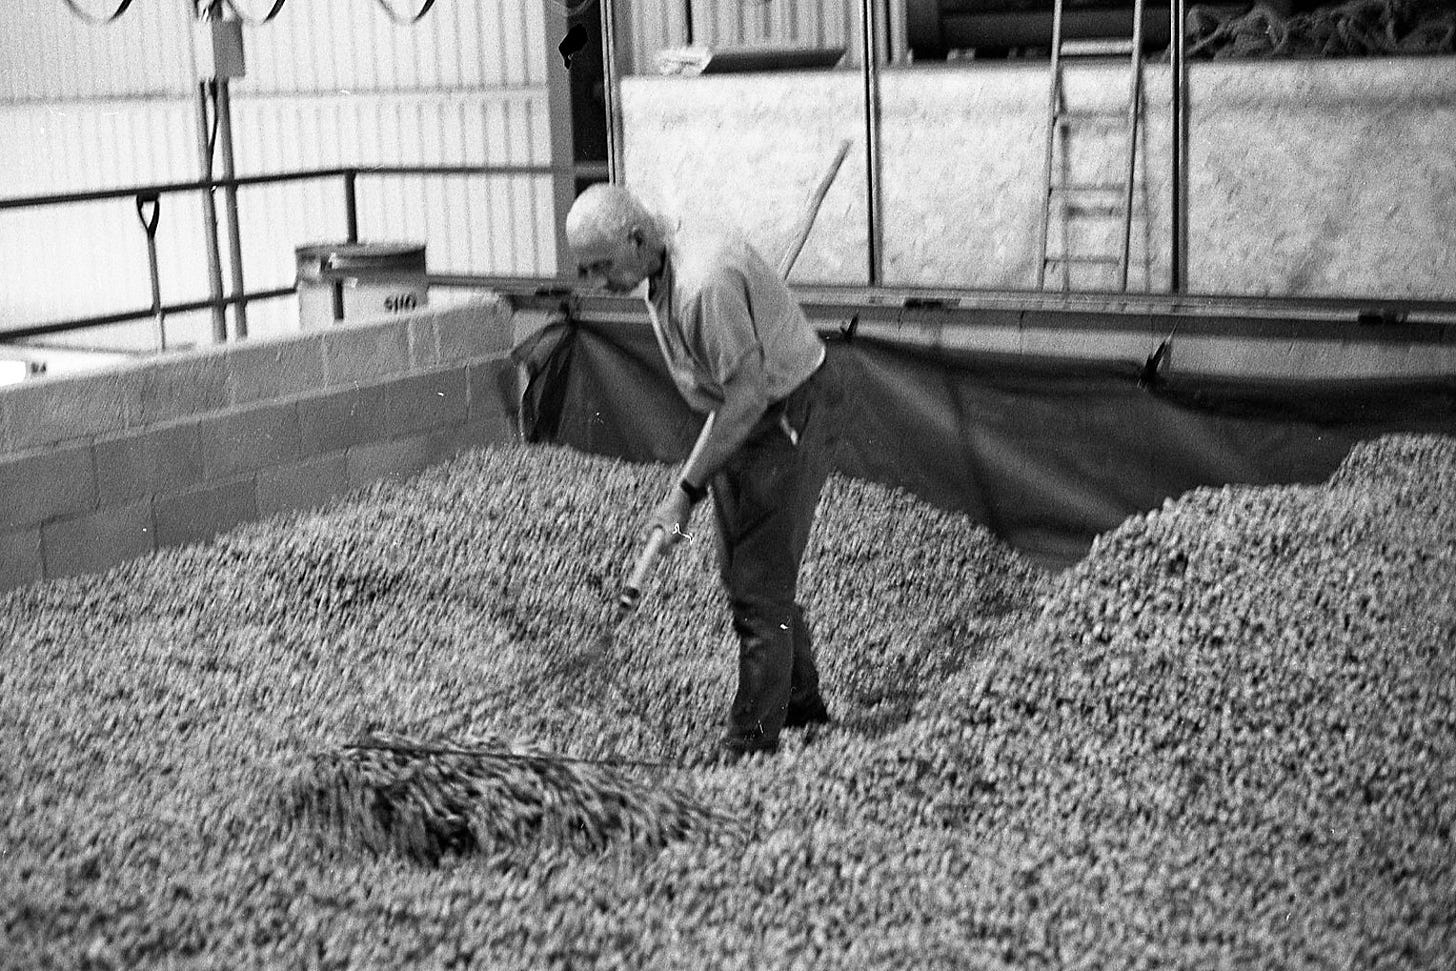 Black and white photograph of a man raking harvested hops